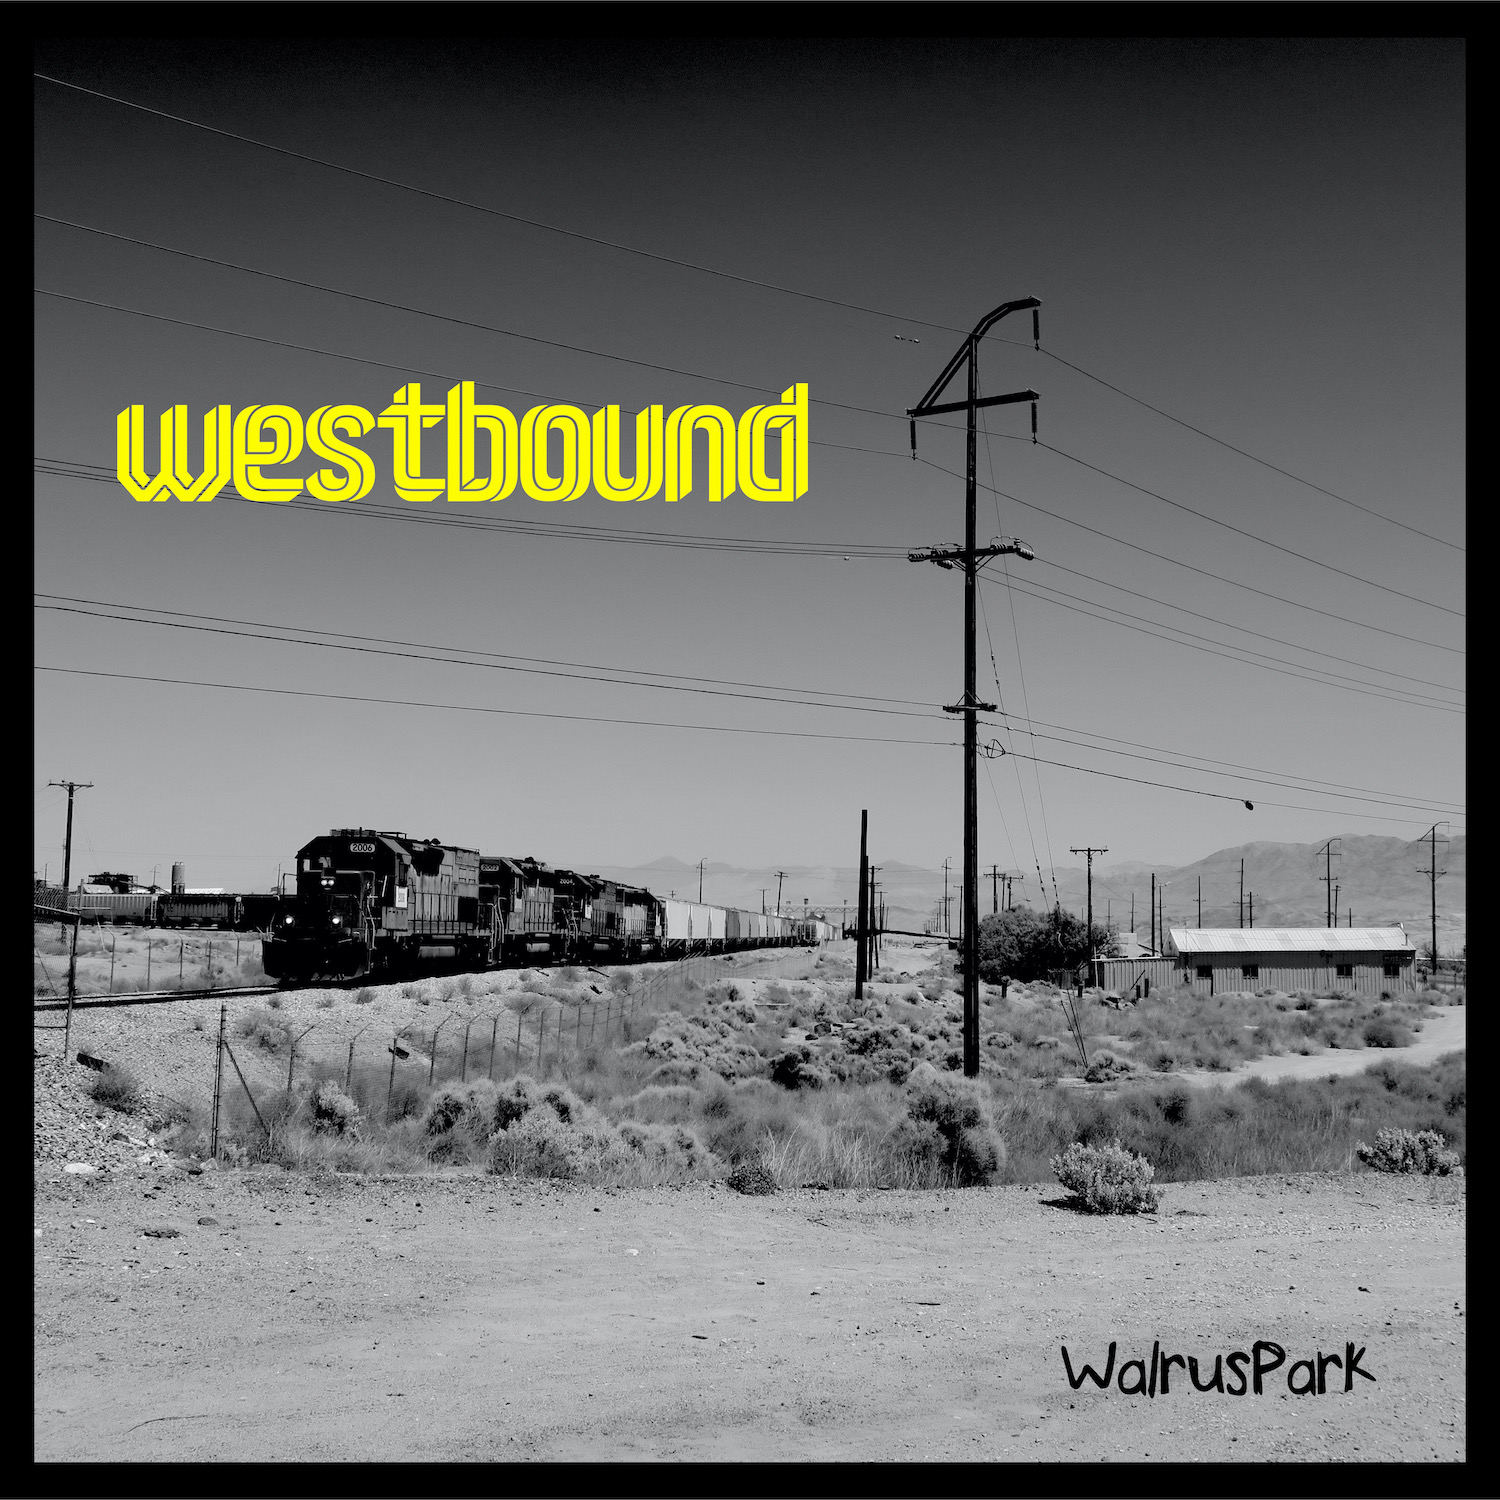 image from Second album released: Westbound